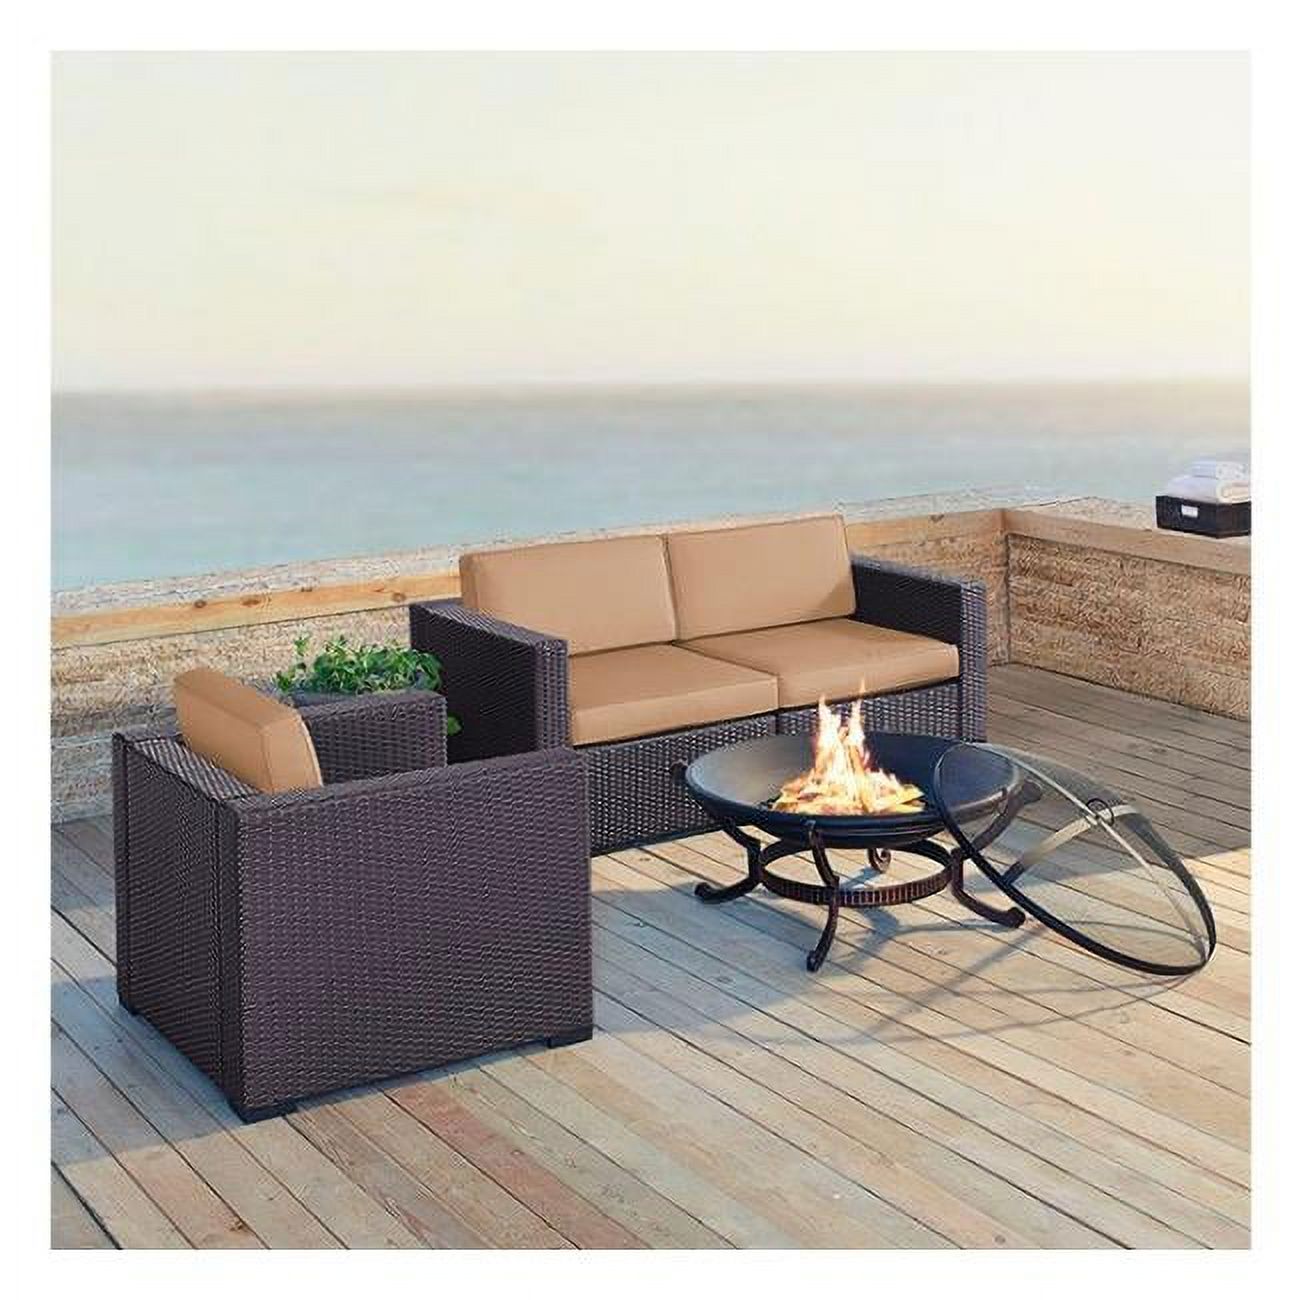 Biscayne 4Pc Outdoor Wicker Conversation Set W/Fire Pit Mocha/Brown - Armchair, Ashland Firepit, & 2 Corner Chairs - image 1 of 4